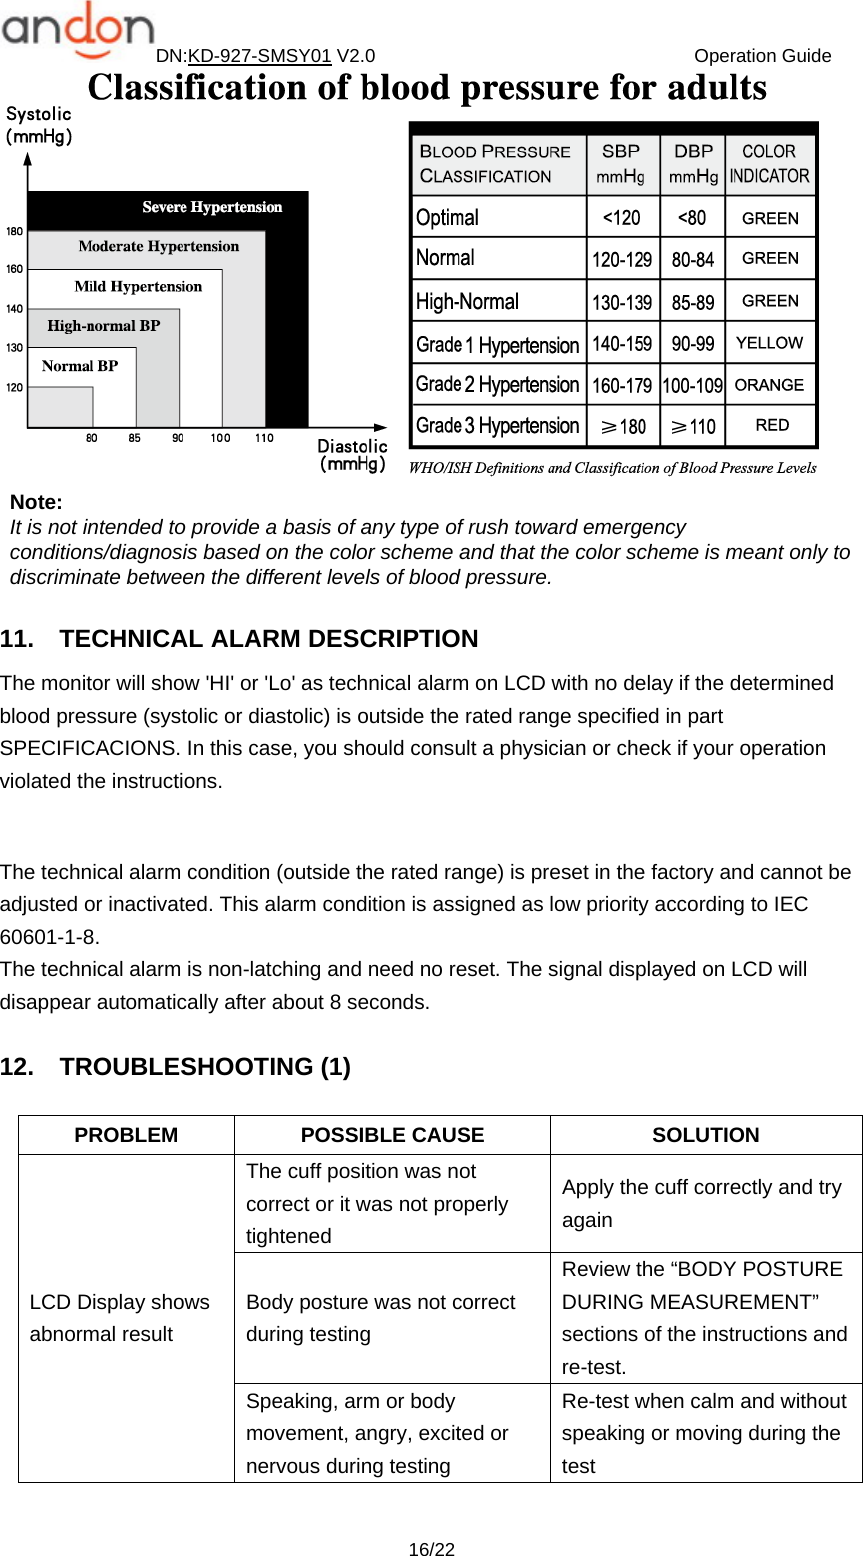 DN:KD-927-SMSY01 V2.0                                  Operation Guide  16/22 Note:  It is not intended to provide a basis of any type of rush toward emergency       conditions/diagnosis based on the color scheme and that the color scheme is meant only to     discriminate between the different levels of blood pressure.    11.  TECHNICAL ALARM DESCRIPTION The monitor will show &apos;HI&apos; or &apos;Lo&apos; as technical alarm on LCD with no delay if the determined blood pressure (systolic or diastolic) is outside the rated range specified in part SPECIFICACIONS. In this case, you should consult a physician or check if your operation violated the instructions.  The technical alarm condition (outside the rated range) is preset in the factory and cannot be adjusted or inactivated. This alarm condition is assigned as low priority according to IEC 60601-1-8. The technical alarm is non-latching and need no reset. The signal displayed on LCD will disappear automatically after about 8 seconds.  12.  TROUBLESHOOTING (1)  PROBLEM POSSIBLE CAUSE  SOLUTION LCD Display shows abnormal result The cuff position was not correct or it was not properly tightened Apply the cuff correctly and try again Body posture was not correct during testing Review the “BODY POSTURE DURING MEASUREMENT” sections of the instructions and re-test. Speaking, arm or body movement, angry, excited or nervous during testing Re-test when calm and without speaking or moving during the test 